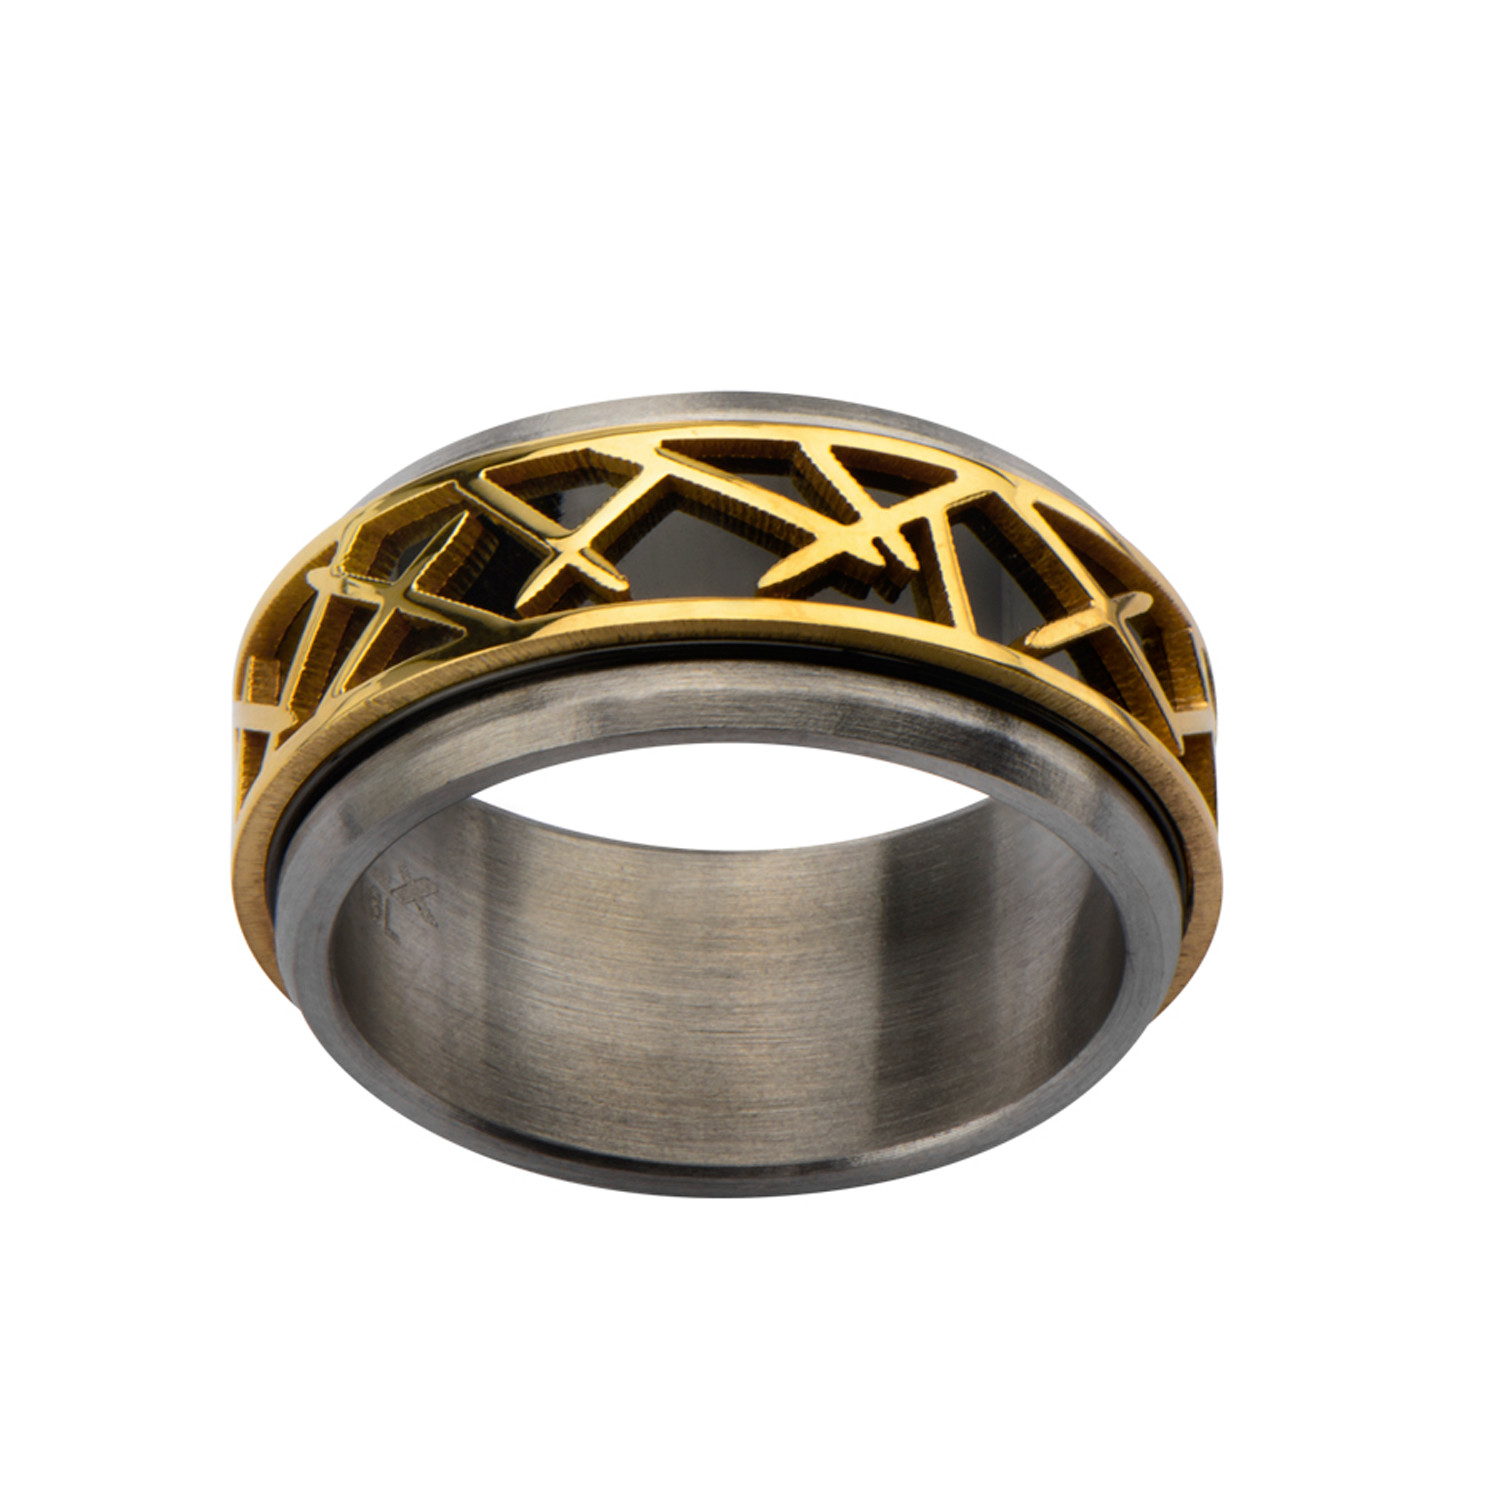 Stainless Steel Thorn Design Ring // Black + Gold (Size 9) - Inox Rings ...